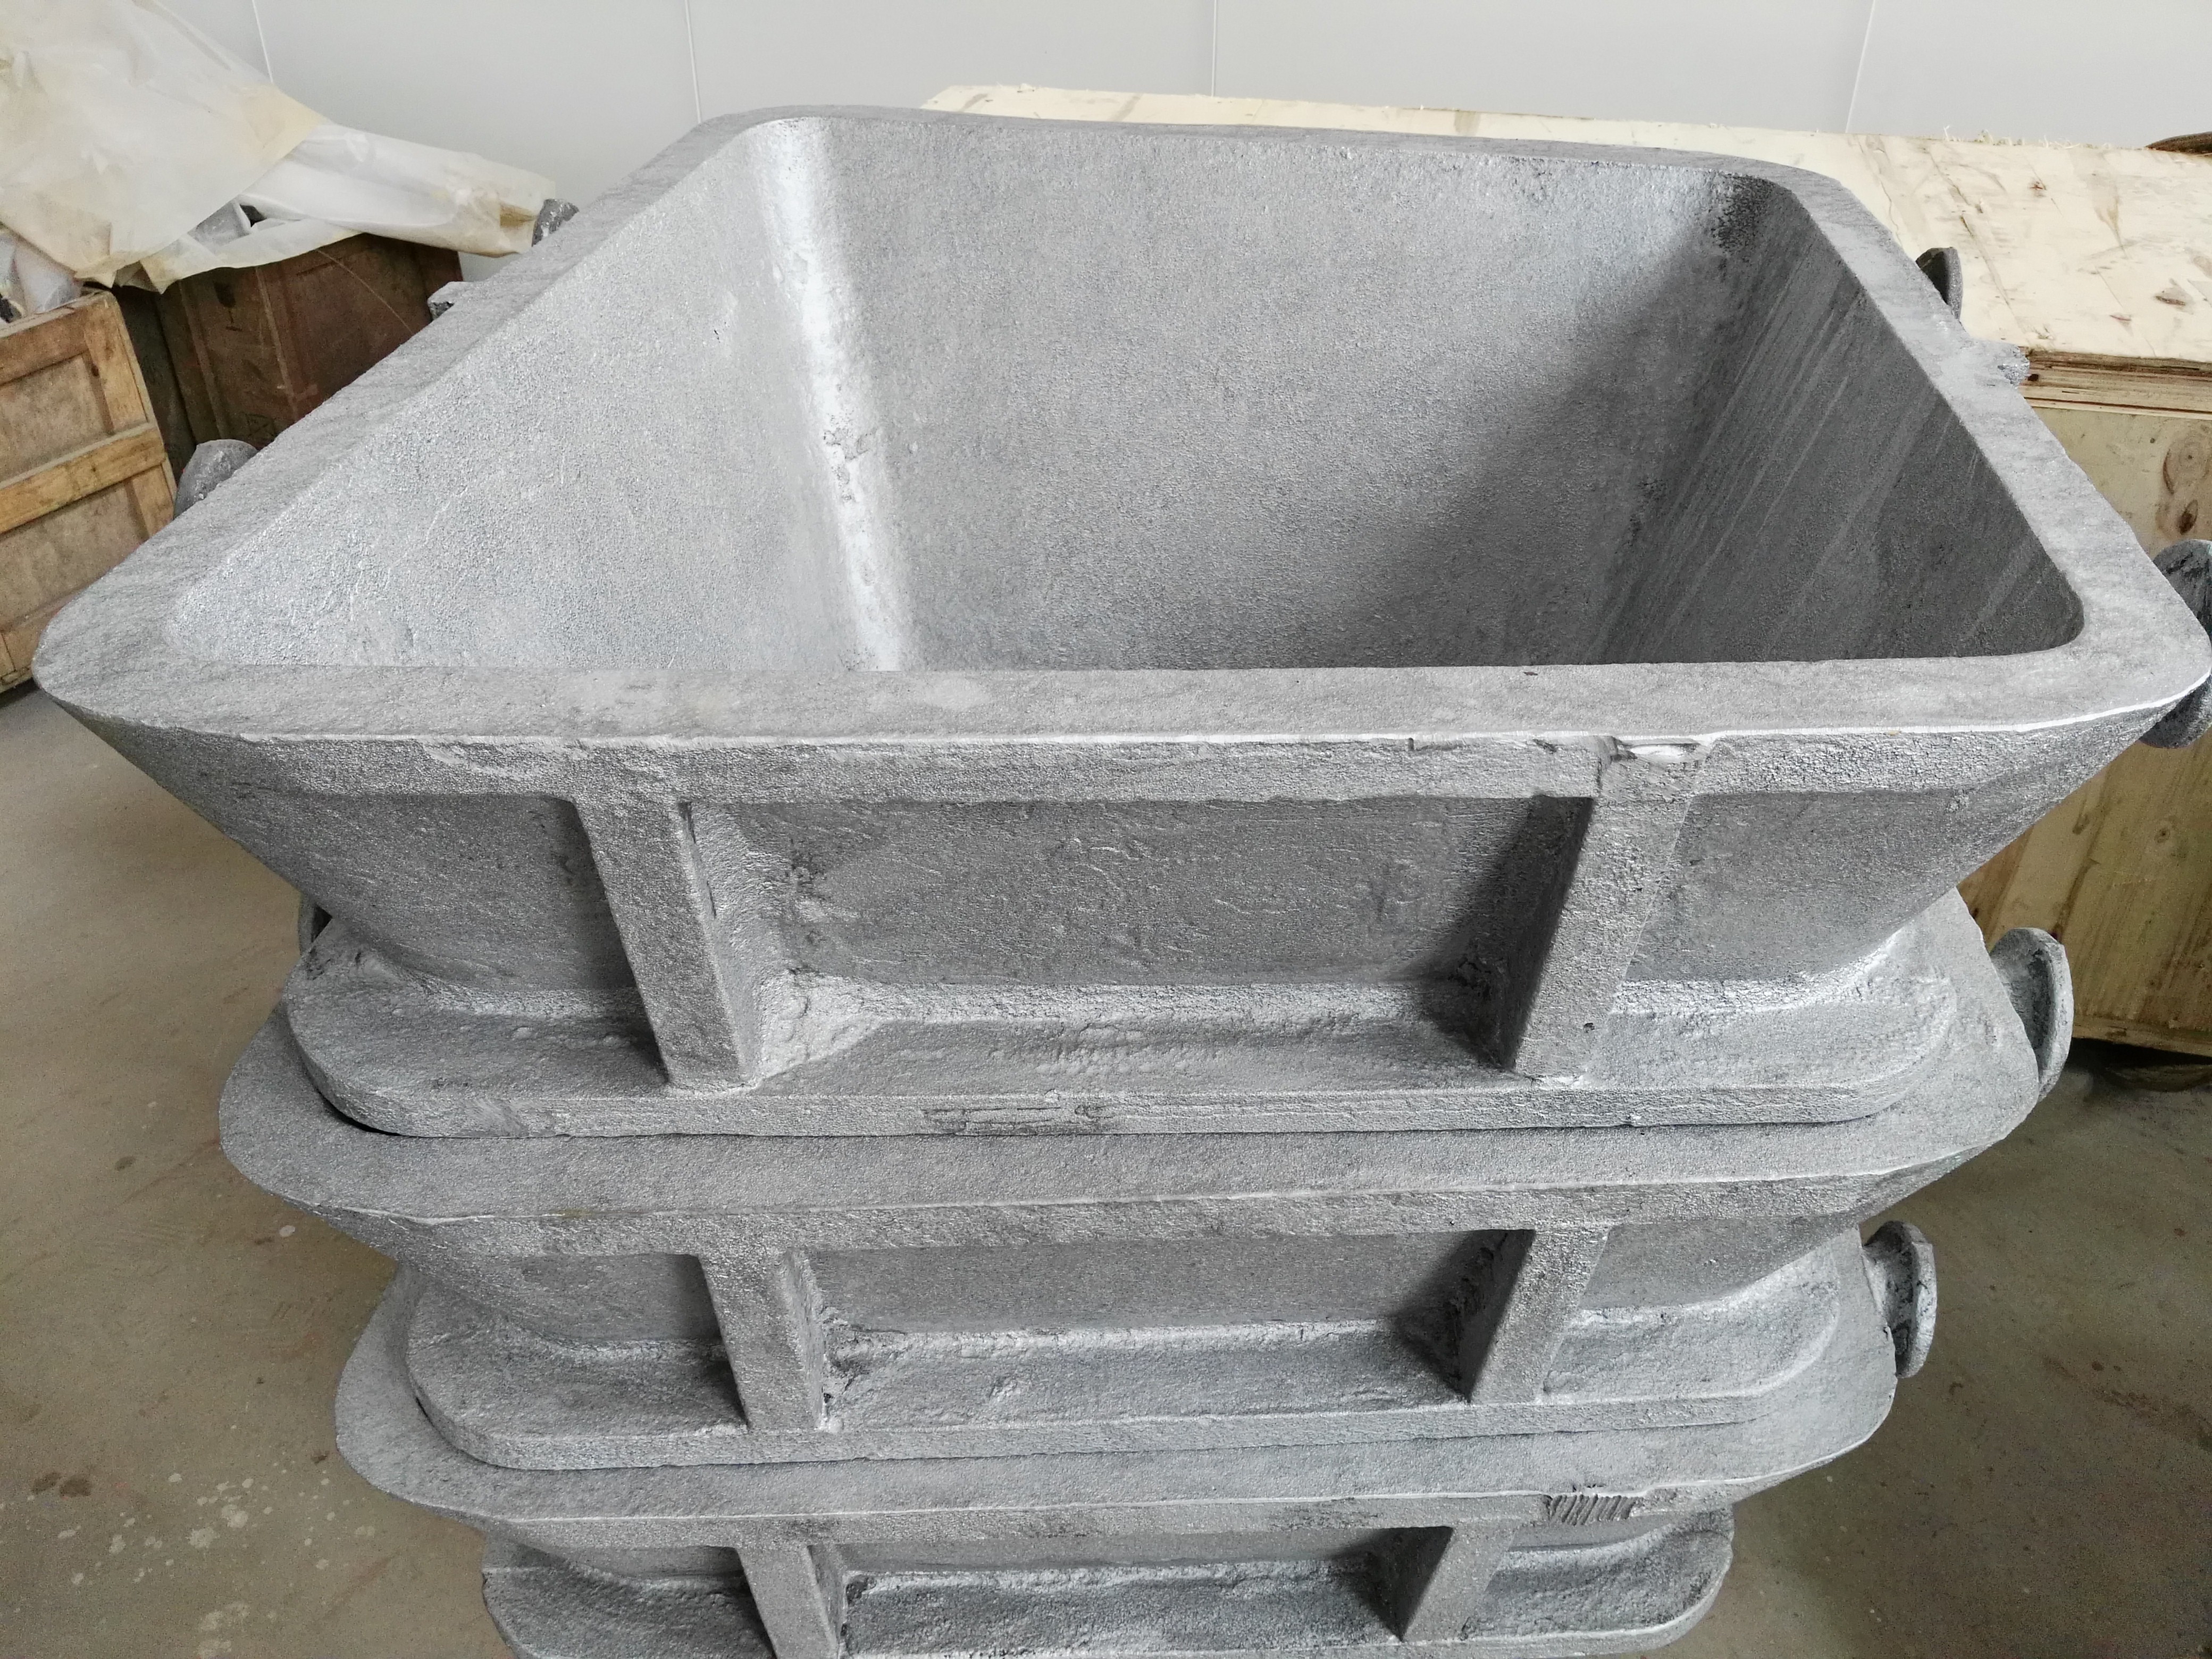 China zinc casting molds customized ingot mold other metal & metallurgy  machinery suppliers, manufacturers - Lufeng Machinery factory